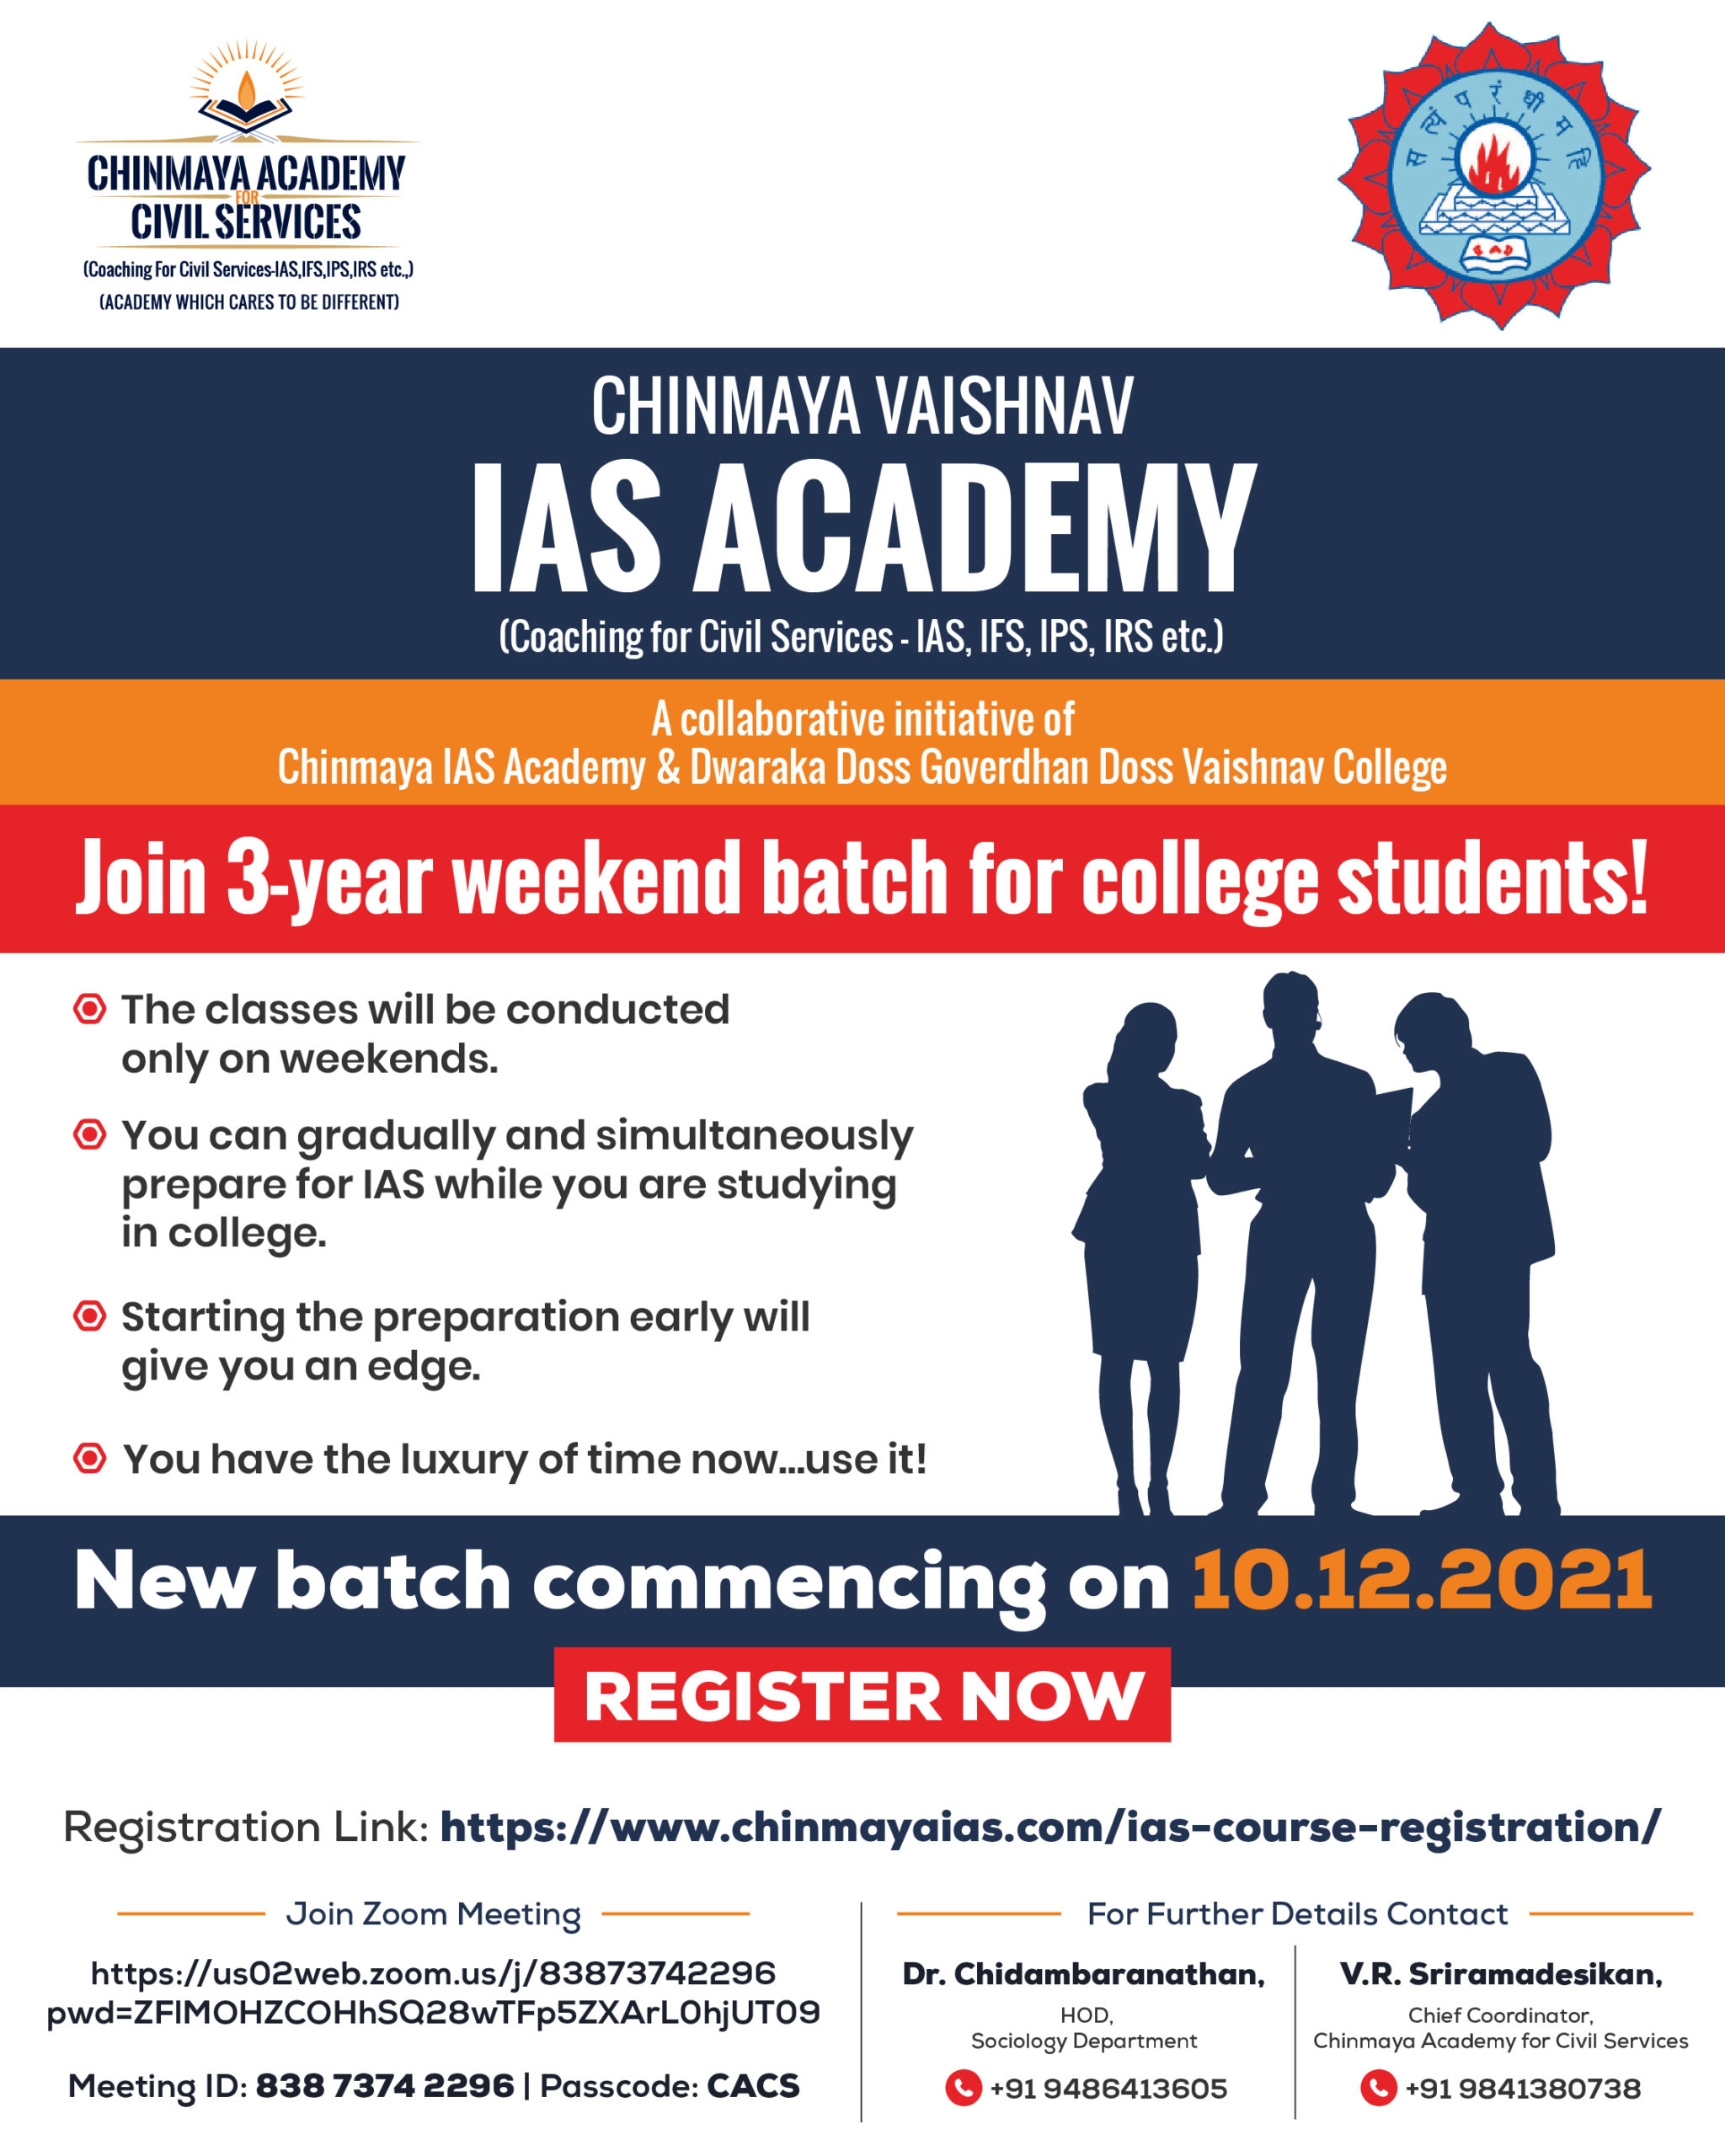 poster on the 3 year weekend batch for college students by Chinmaya IAS Academy